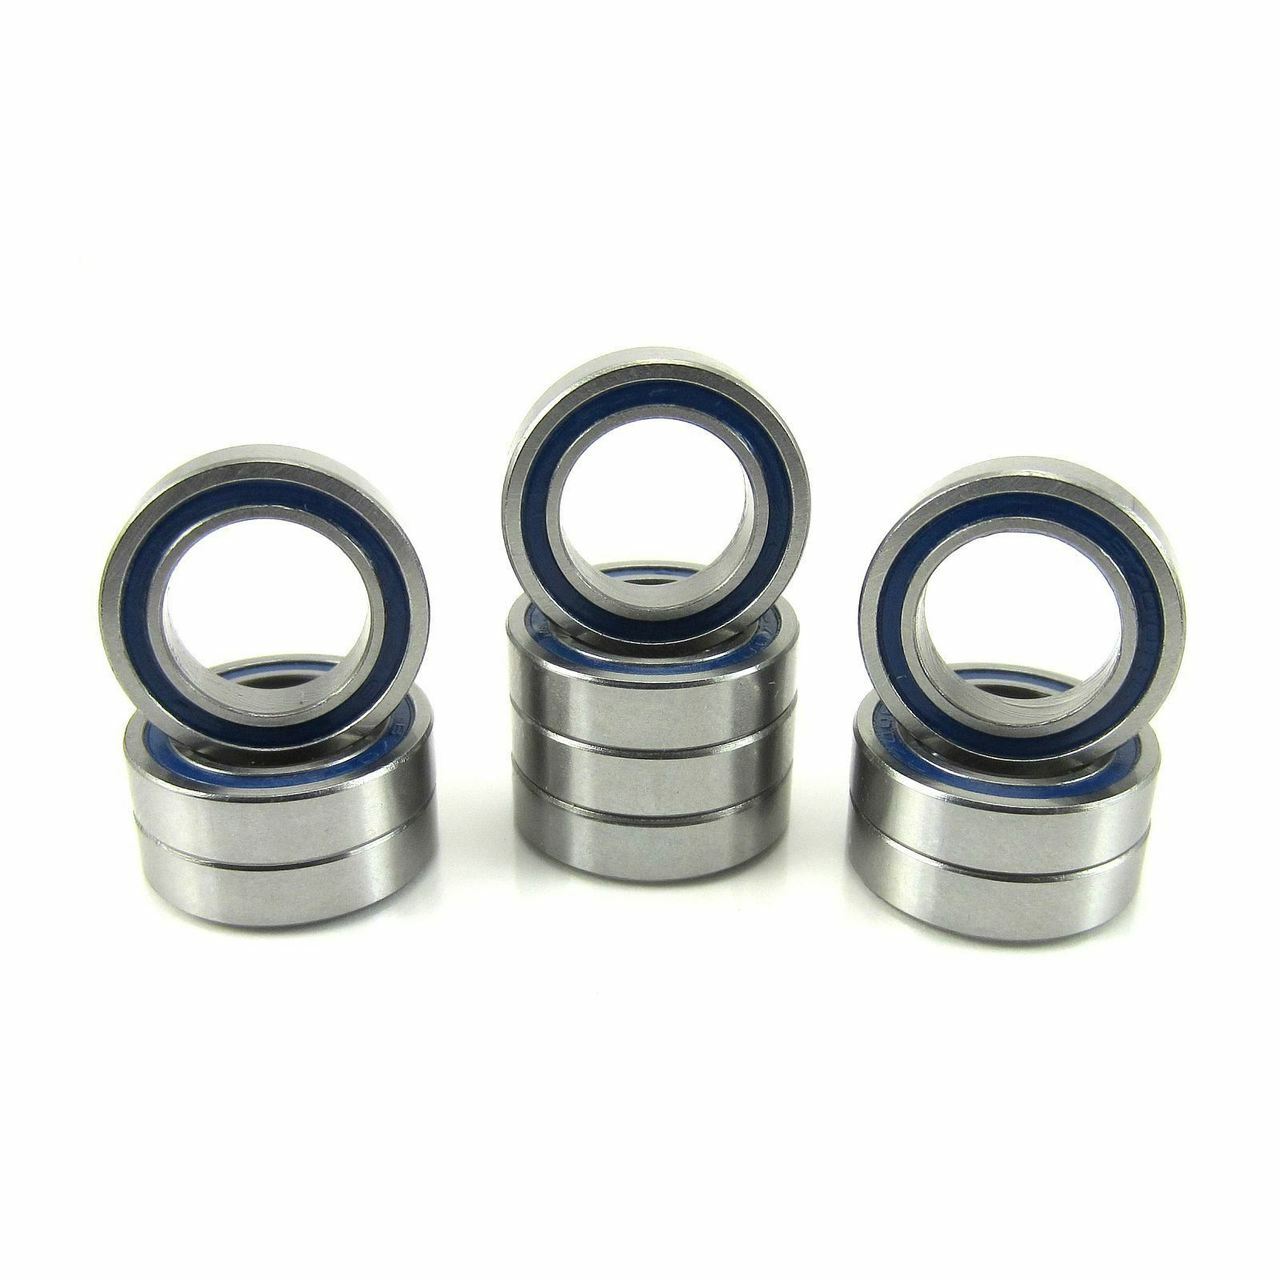 MR1016-2RS 10x16x4mm Precision High Speed RC Car Ball Bearing, Chrome Steel (GCr15) with Blue Rubber Seals ABEC-1 ABEC-3 ABEC-5